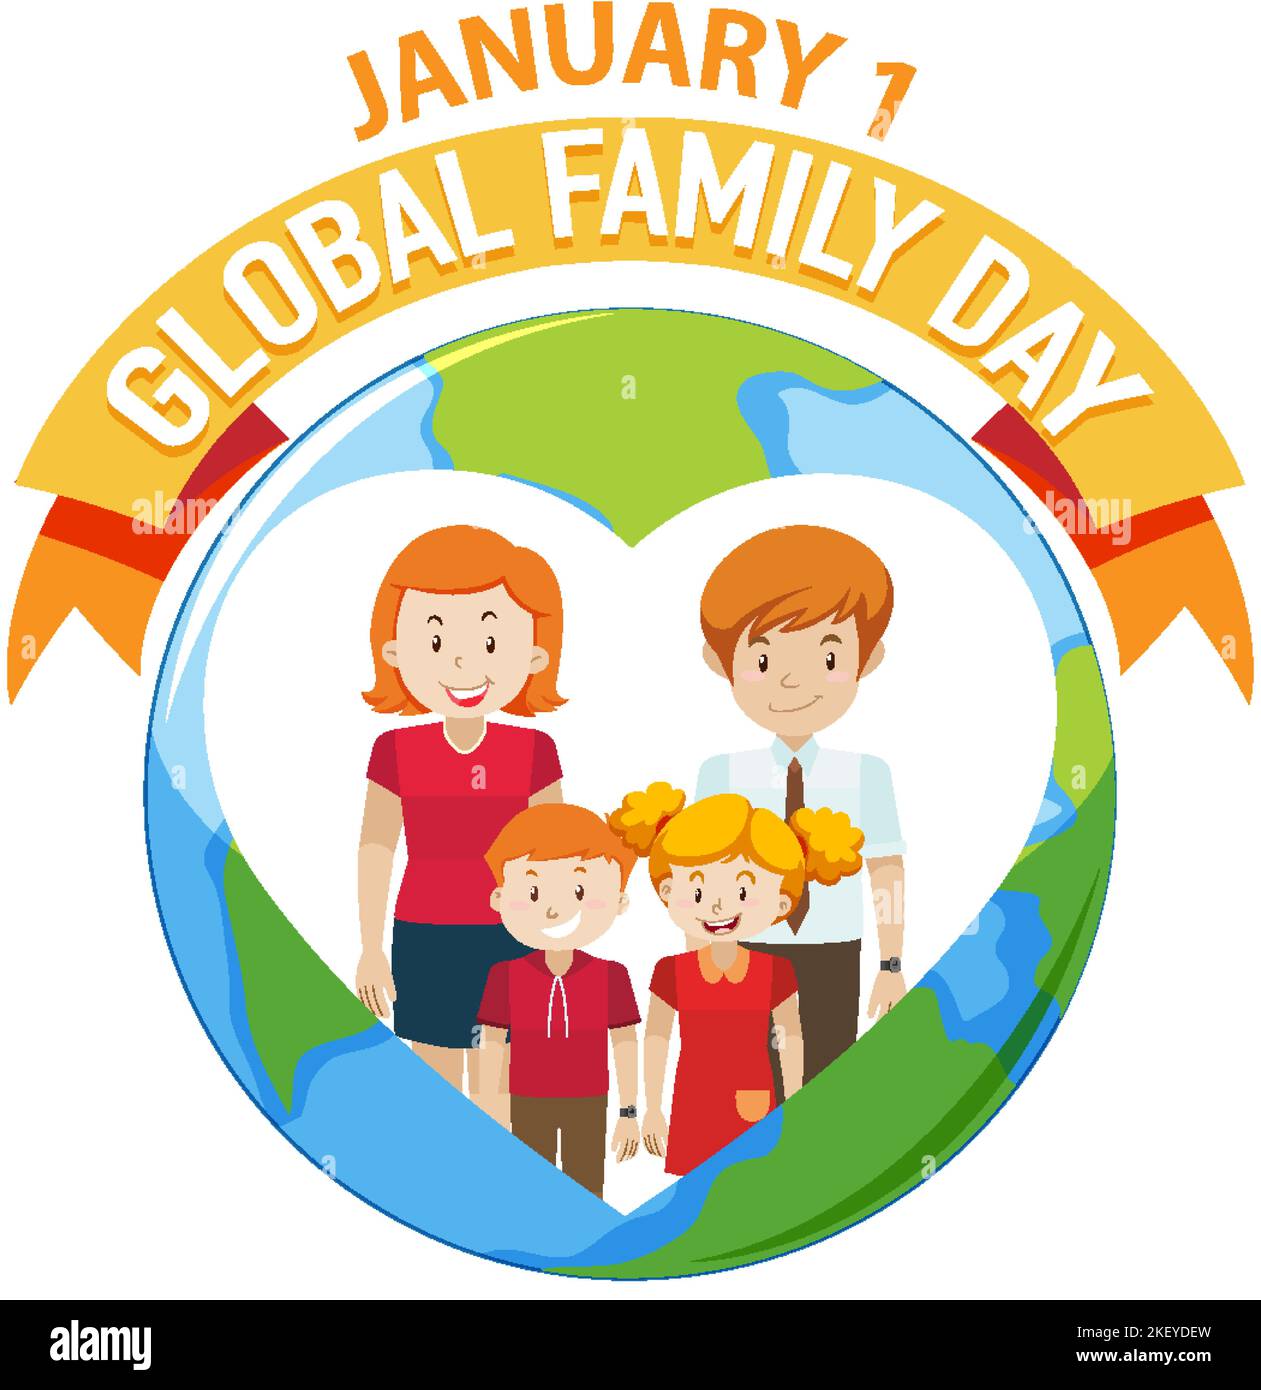 global family day essay